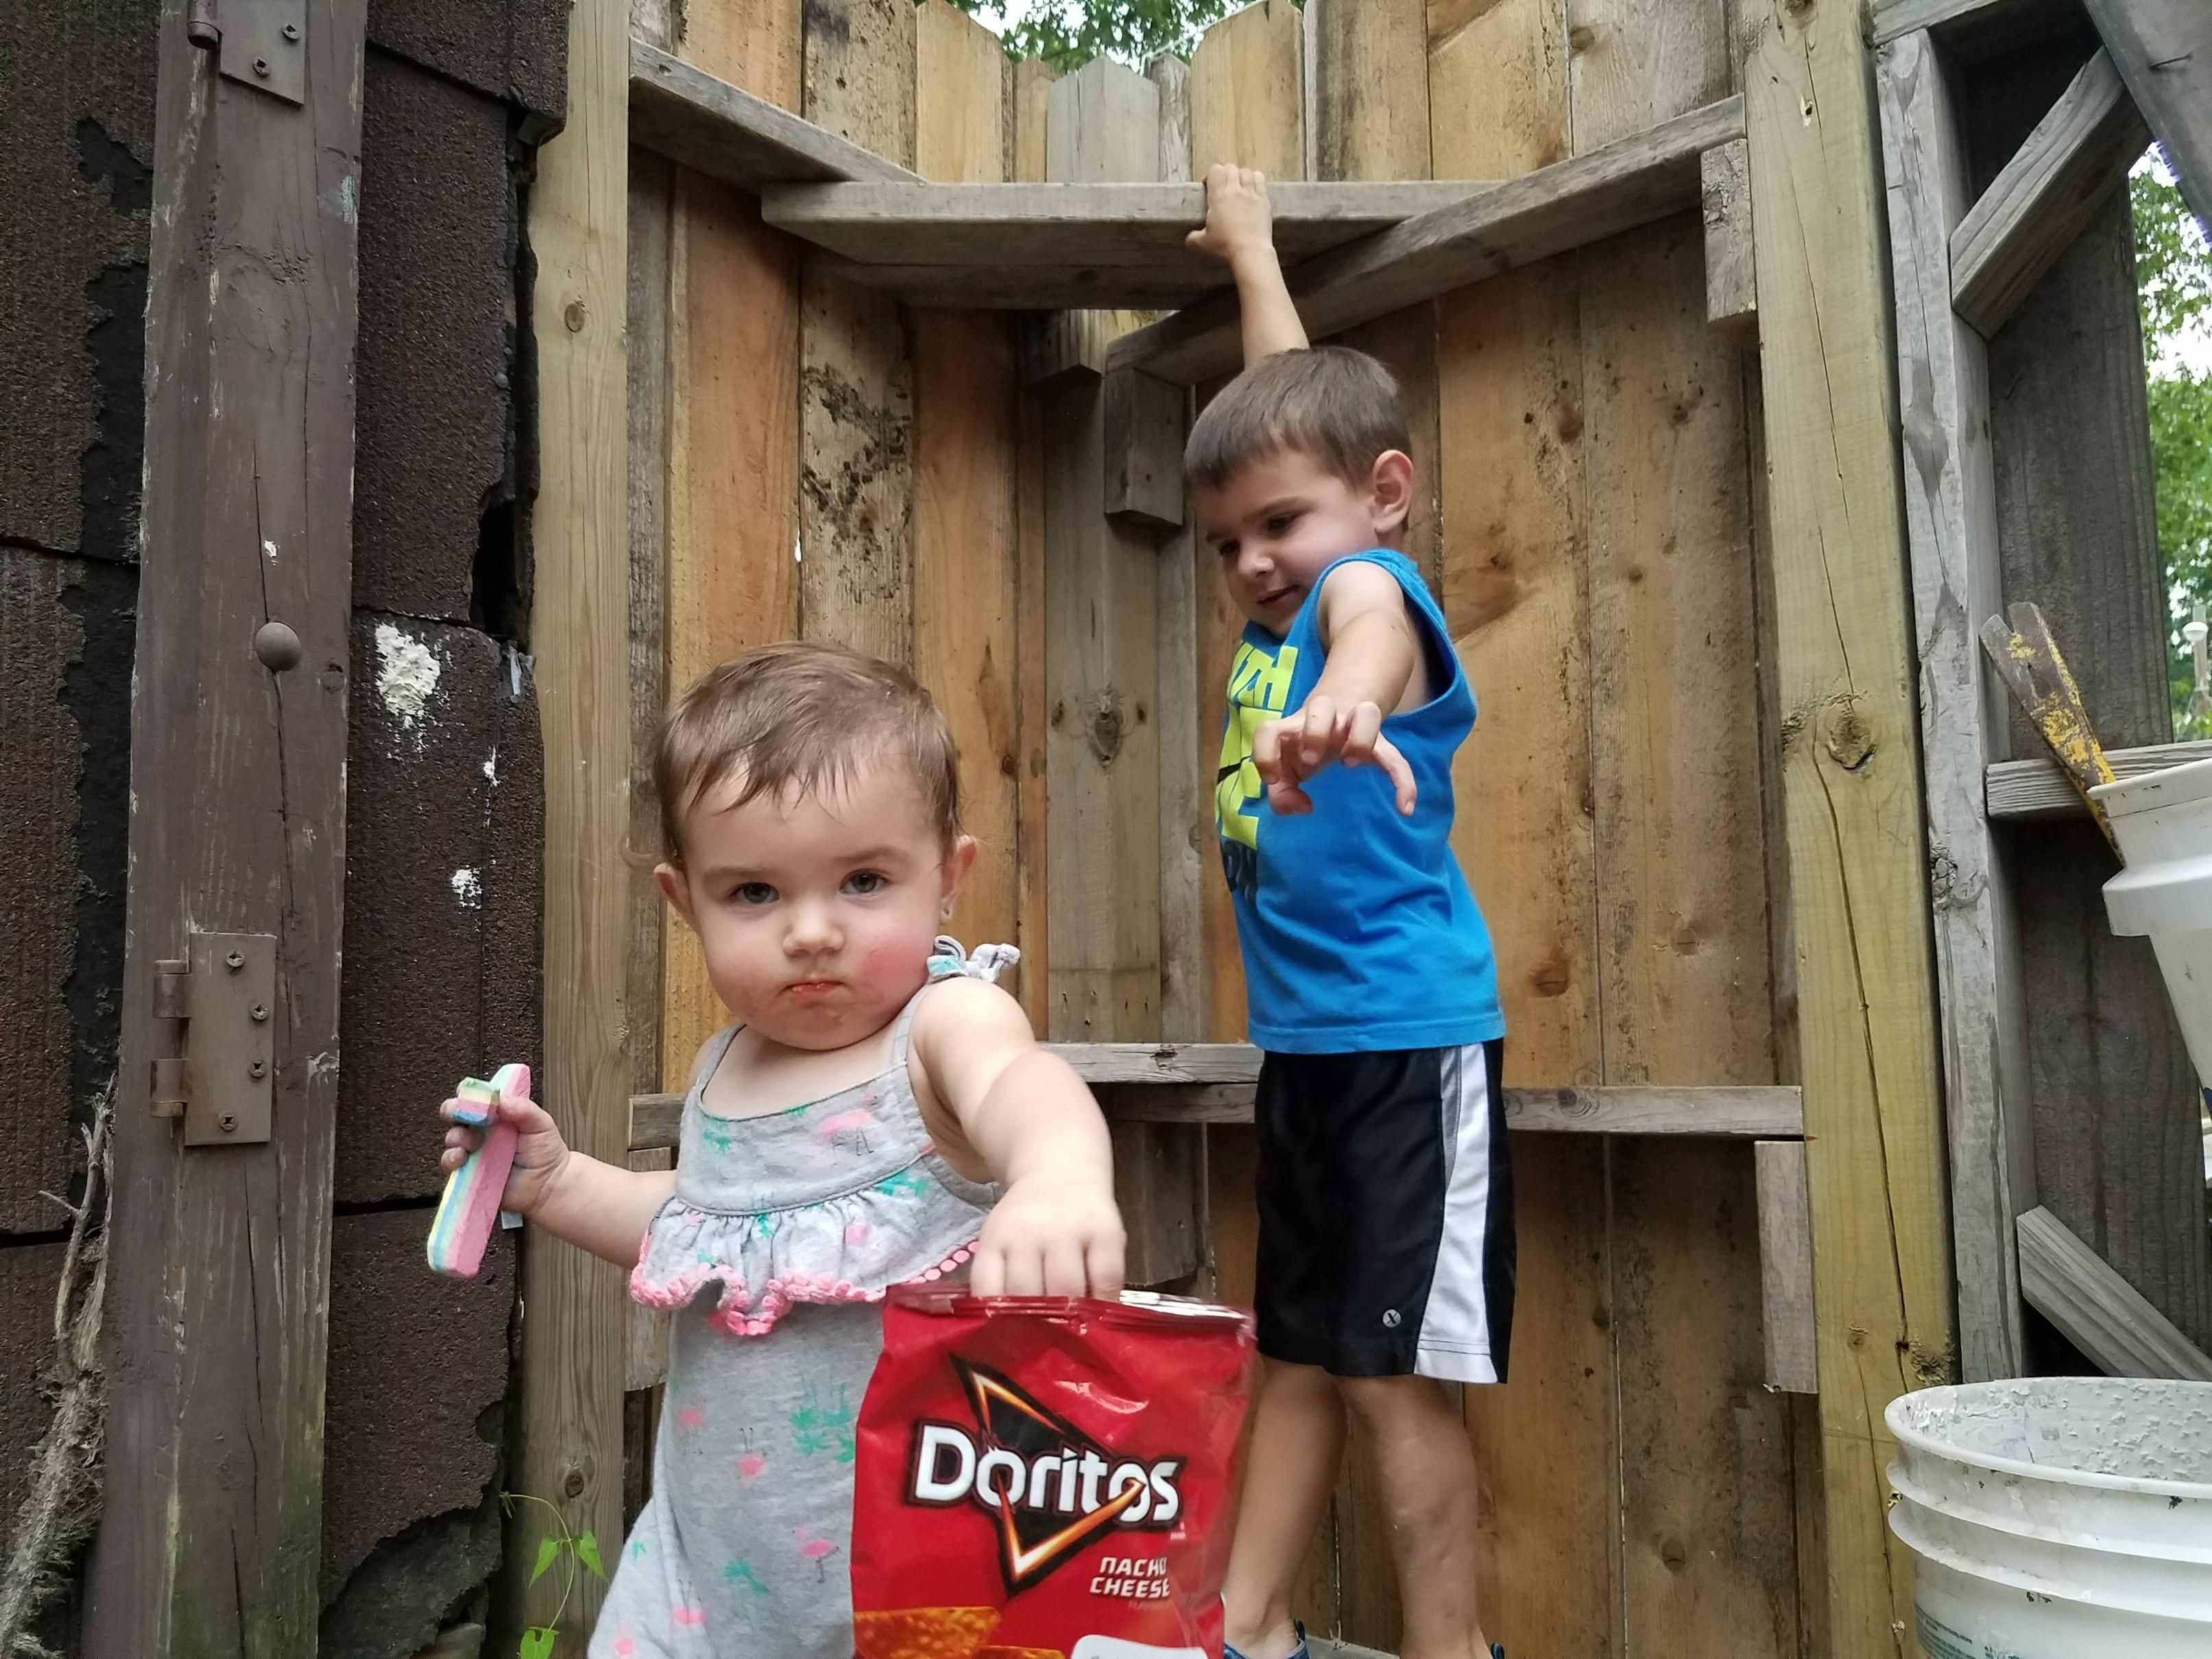 My kids accidently created a Doritos advertisement.